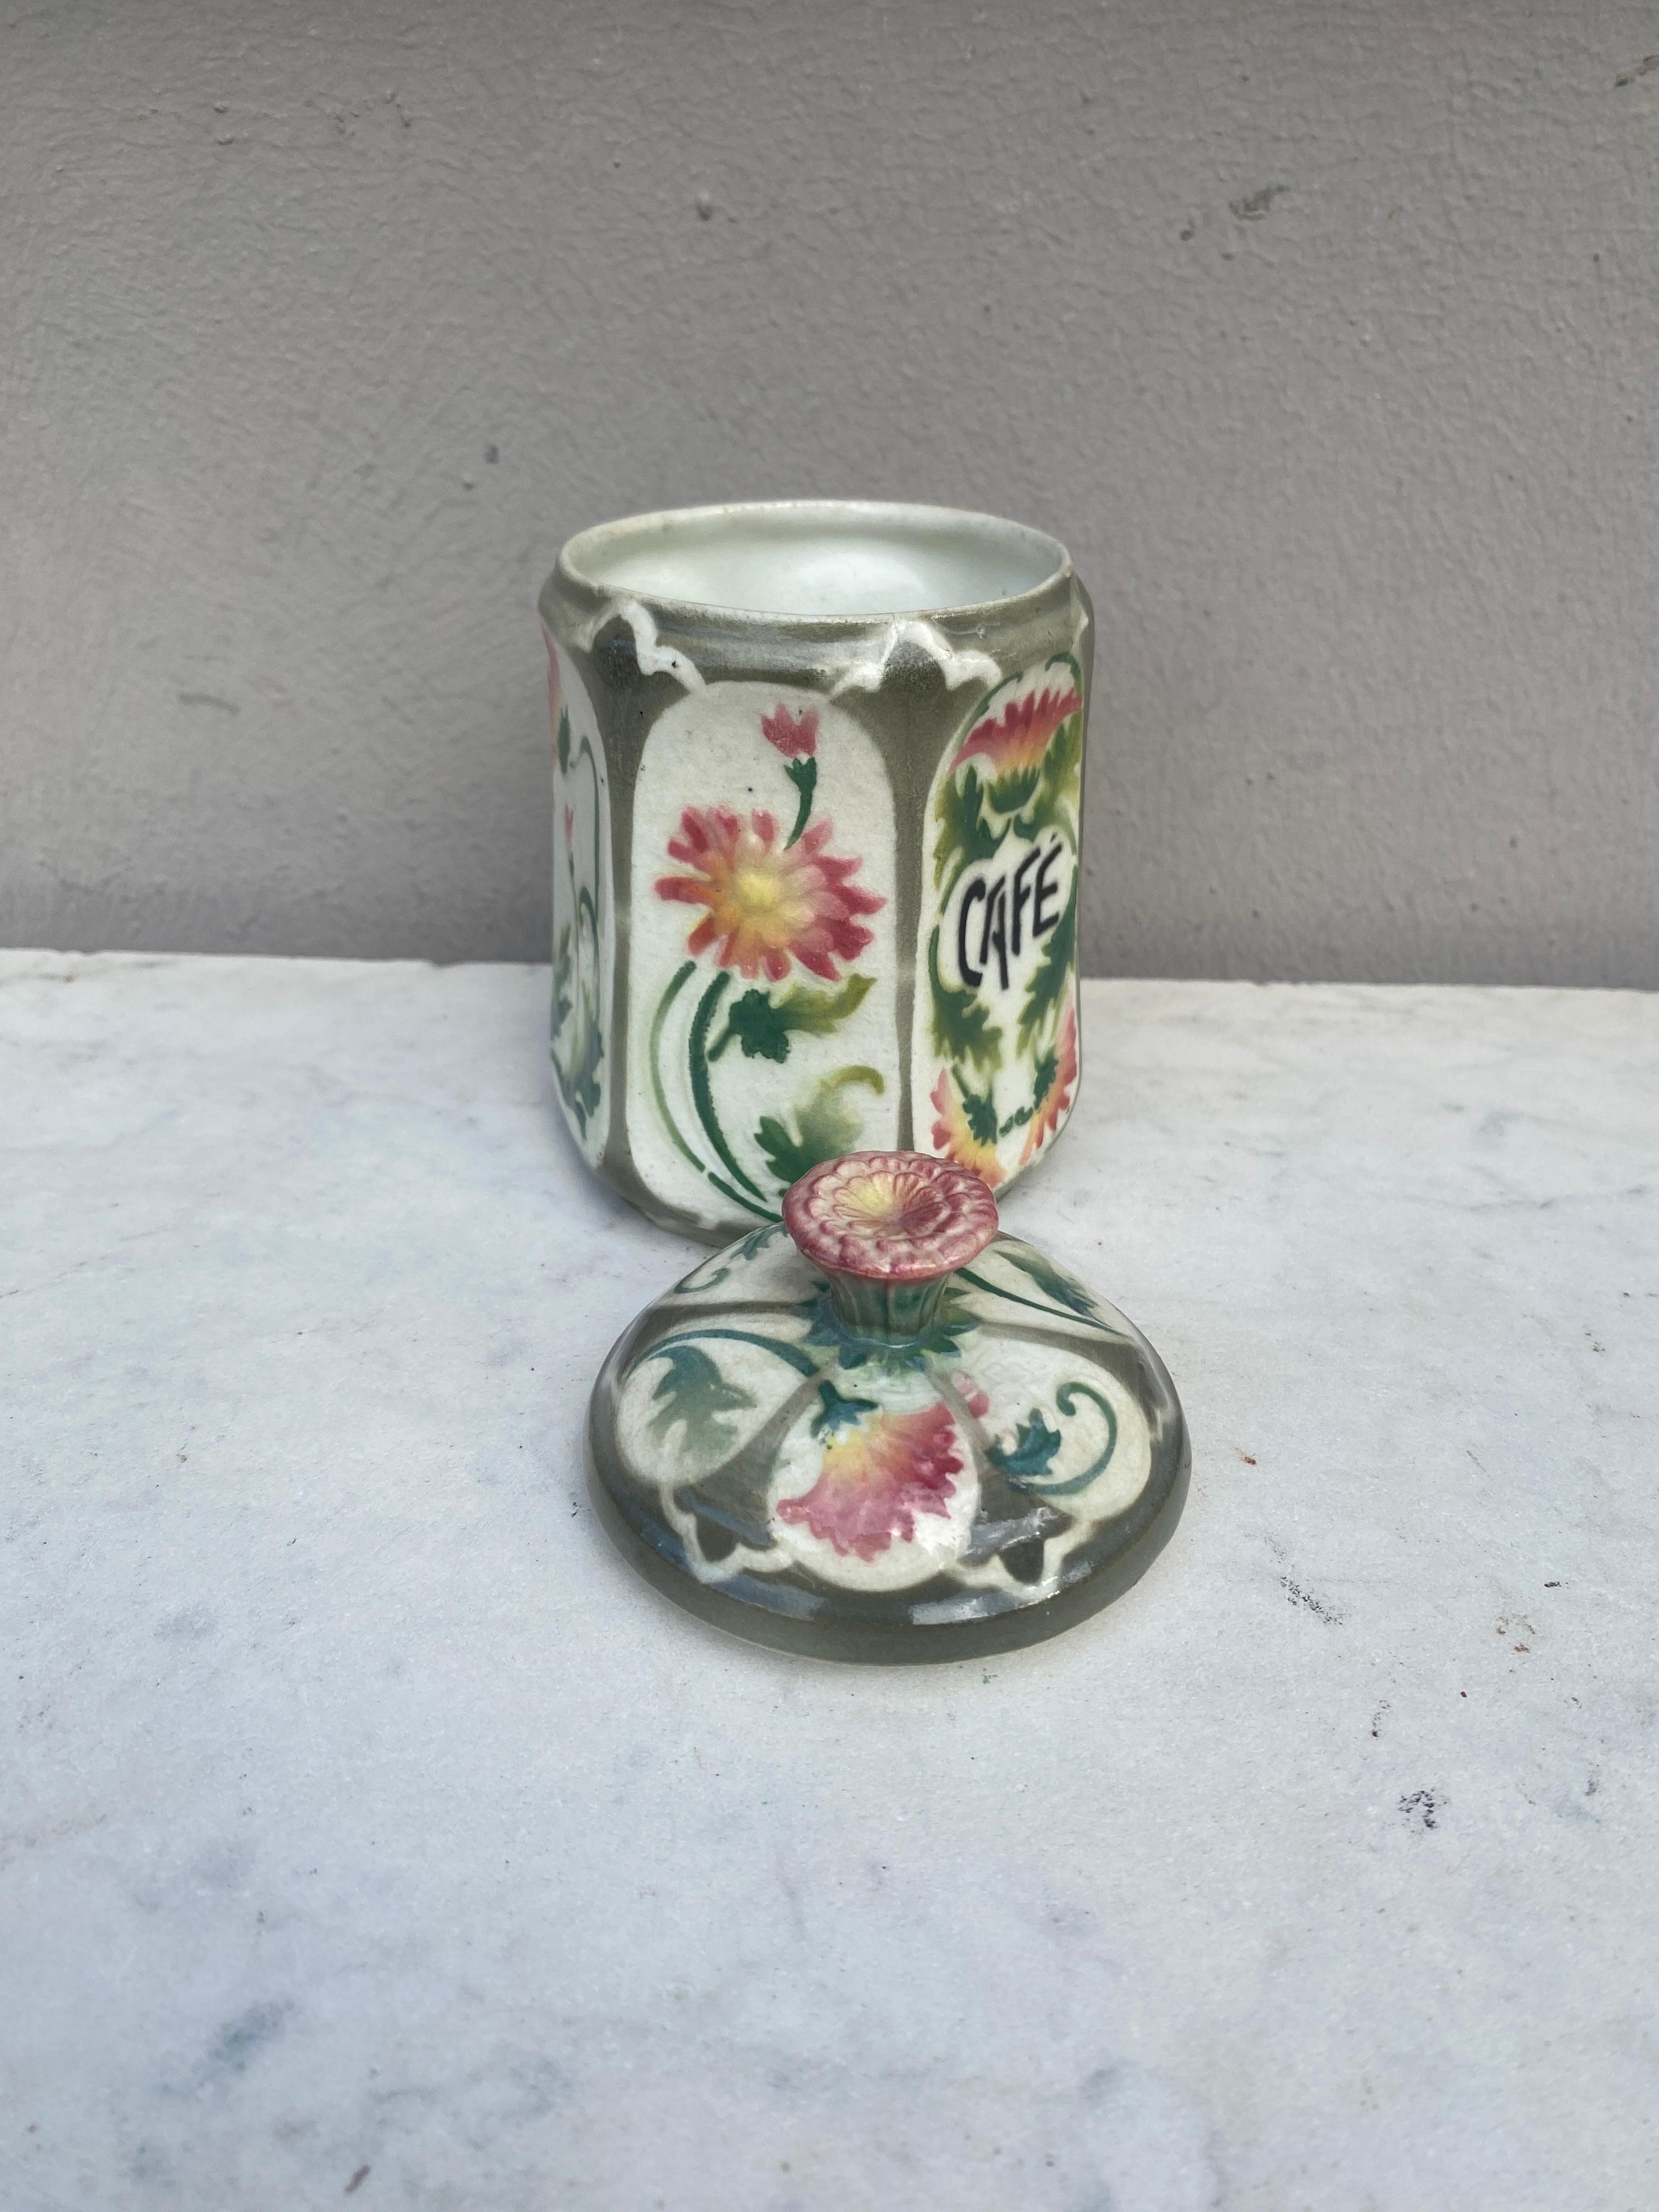 French Majolica Daisies Kitchen Coffee Canister signed Saint Clement Keller & Guerin Circa 1900.
H / 5.2 inches.
Coffee / Cafe in French.